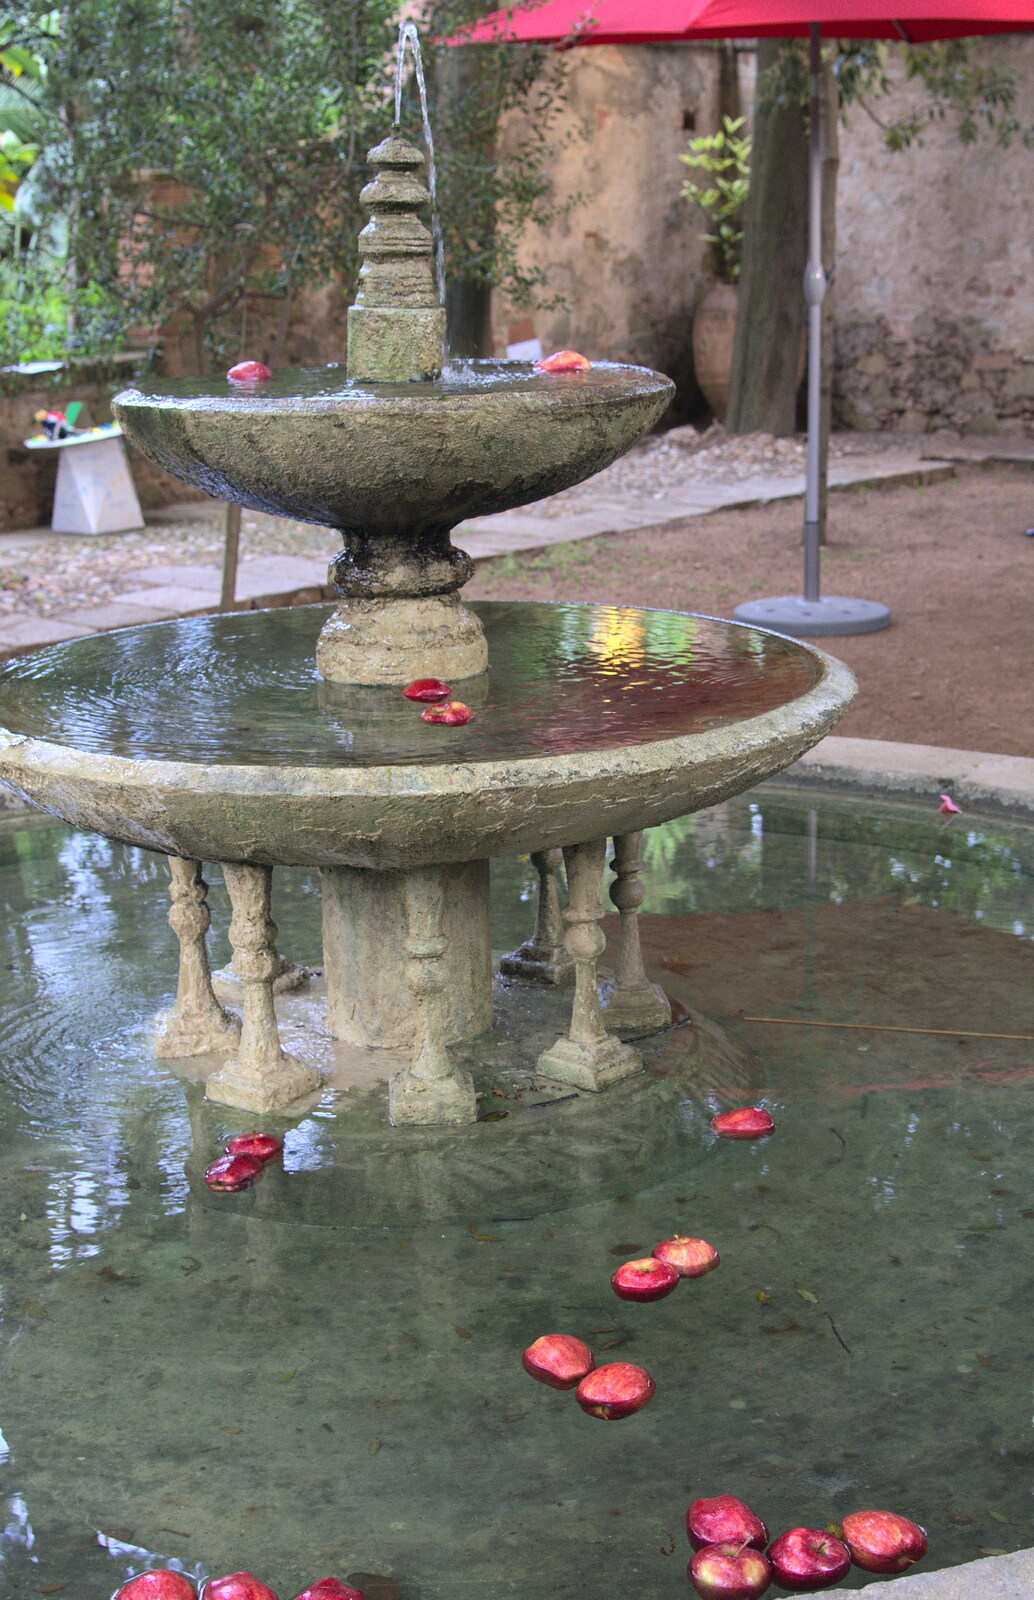 Apples float in a fountain from The Open Education Challenge, Barcelona, Catalonia - 13th July 2014